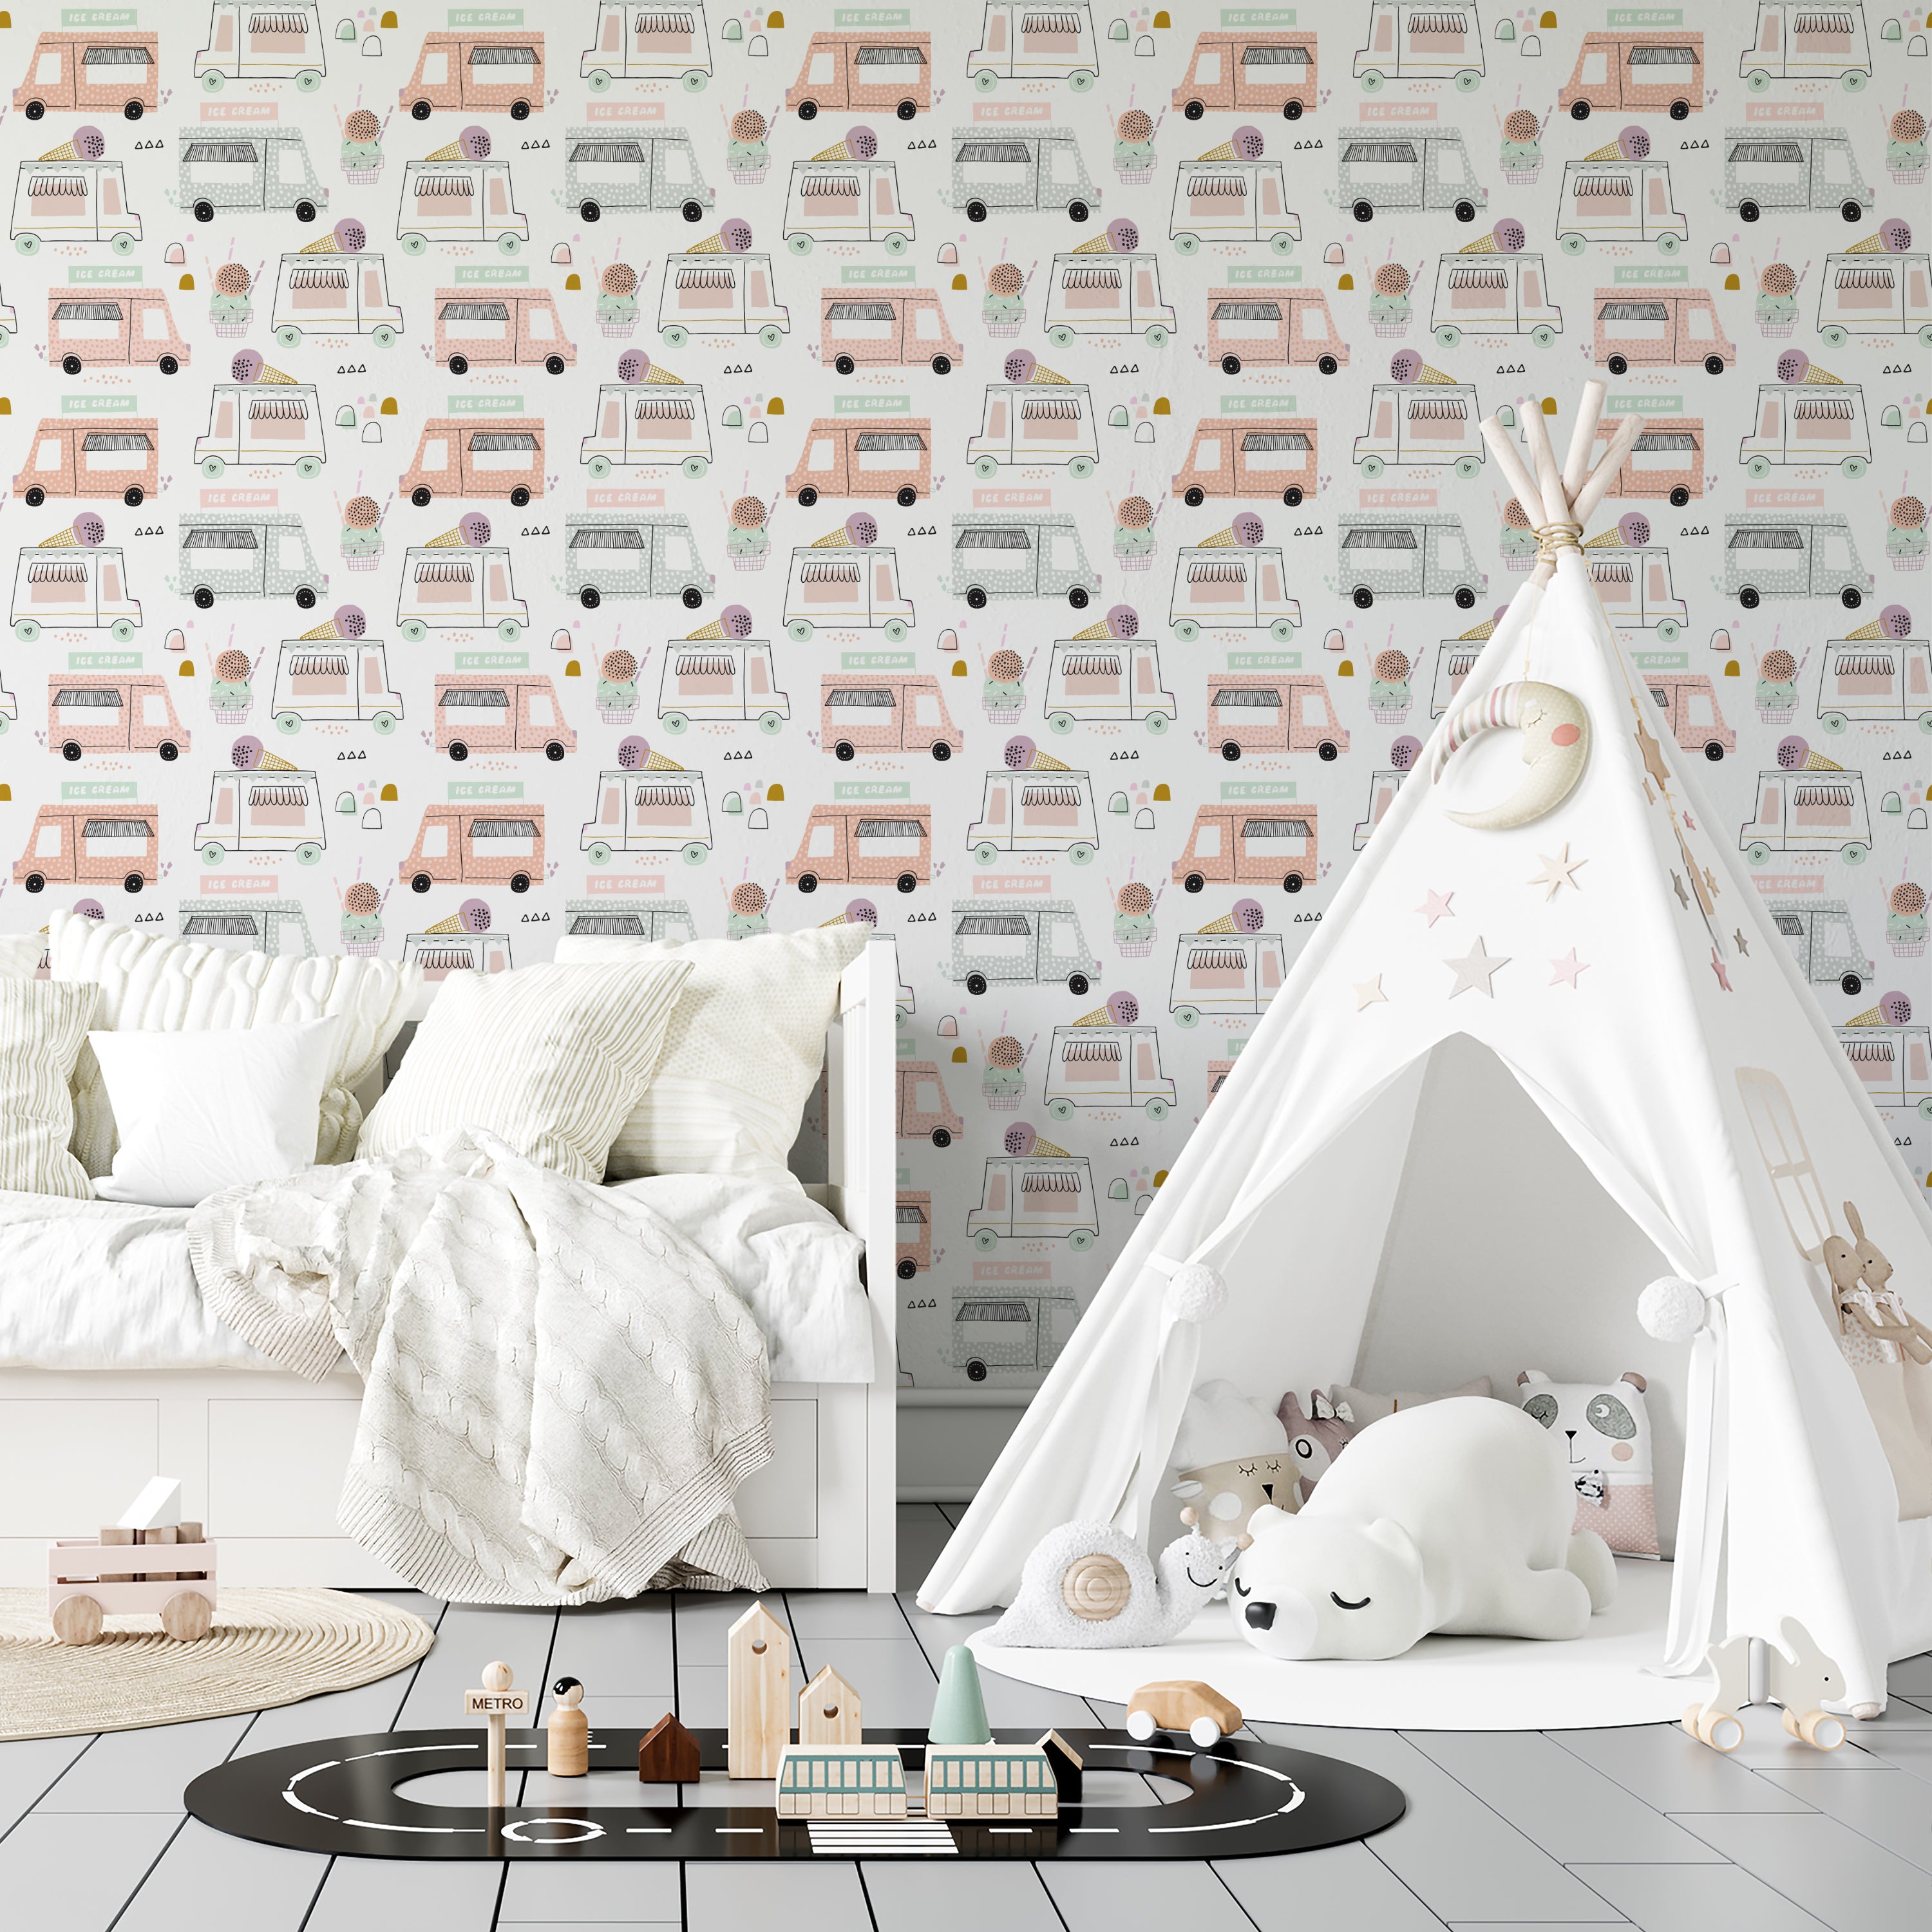 Child’s bedroom featuring walls adorned with a fun wallpaper displaying ice cream trucks and various ice cream illustrations, creating a vibrant and cheerful play space, complemented by a white tent and playful decor.